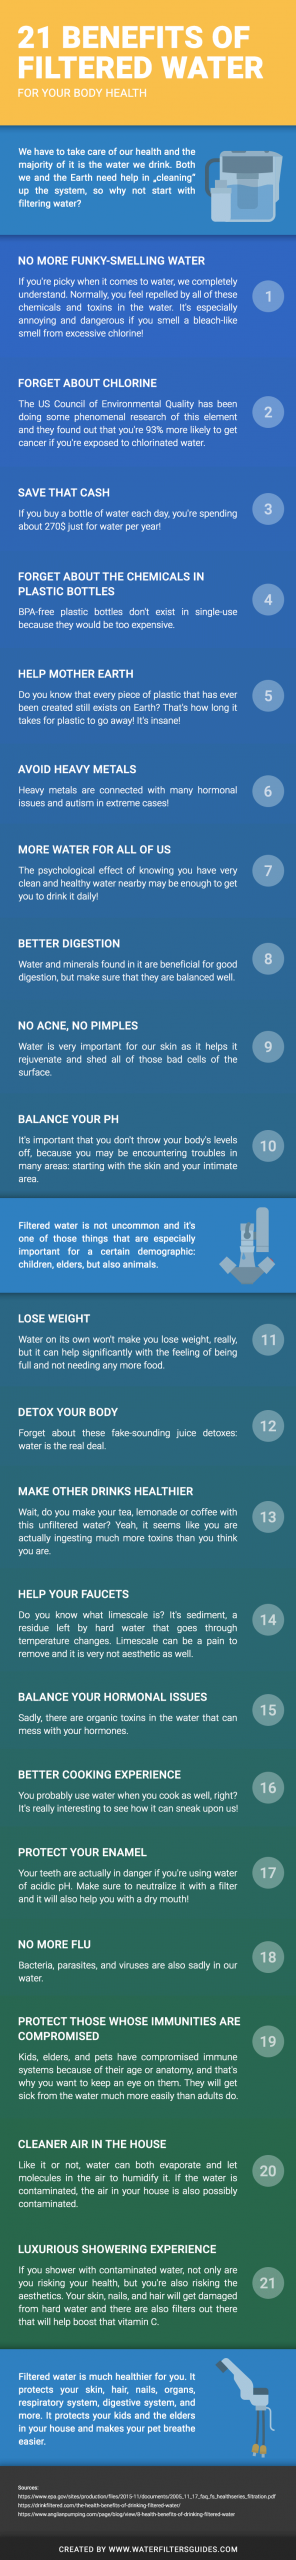 21 Benefits Of Filtered Water